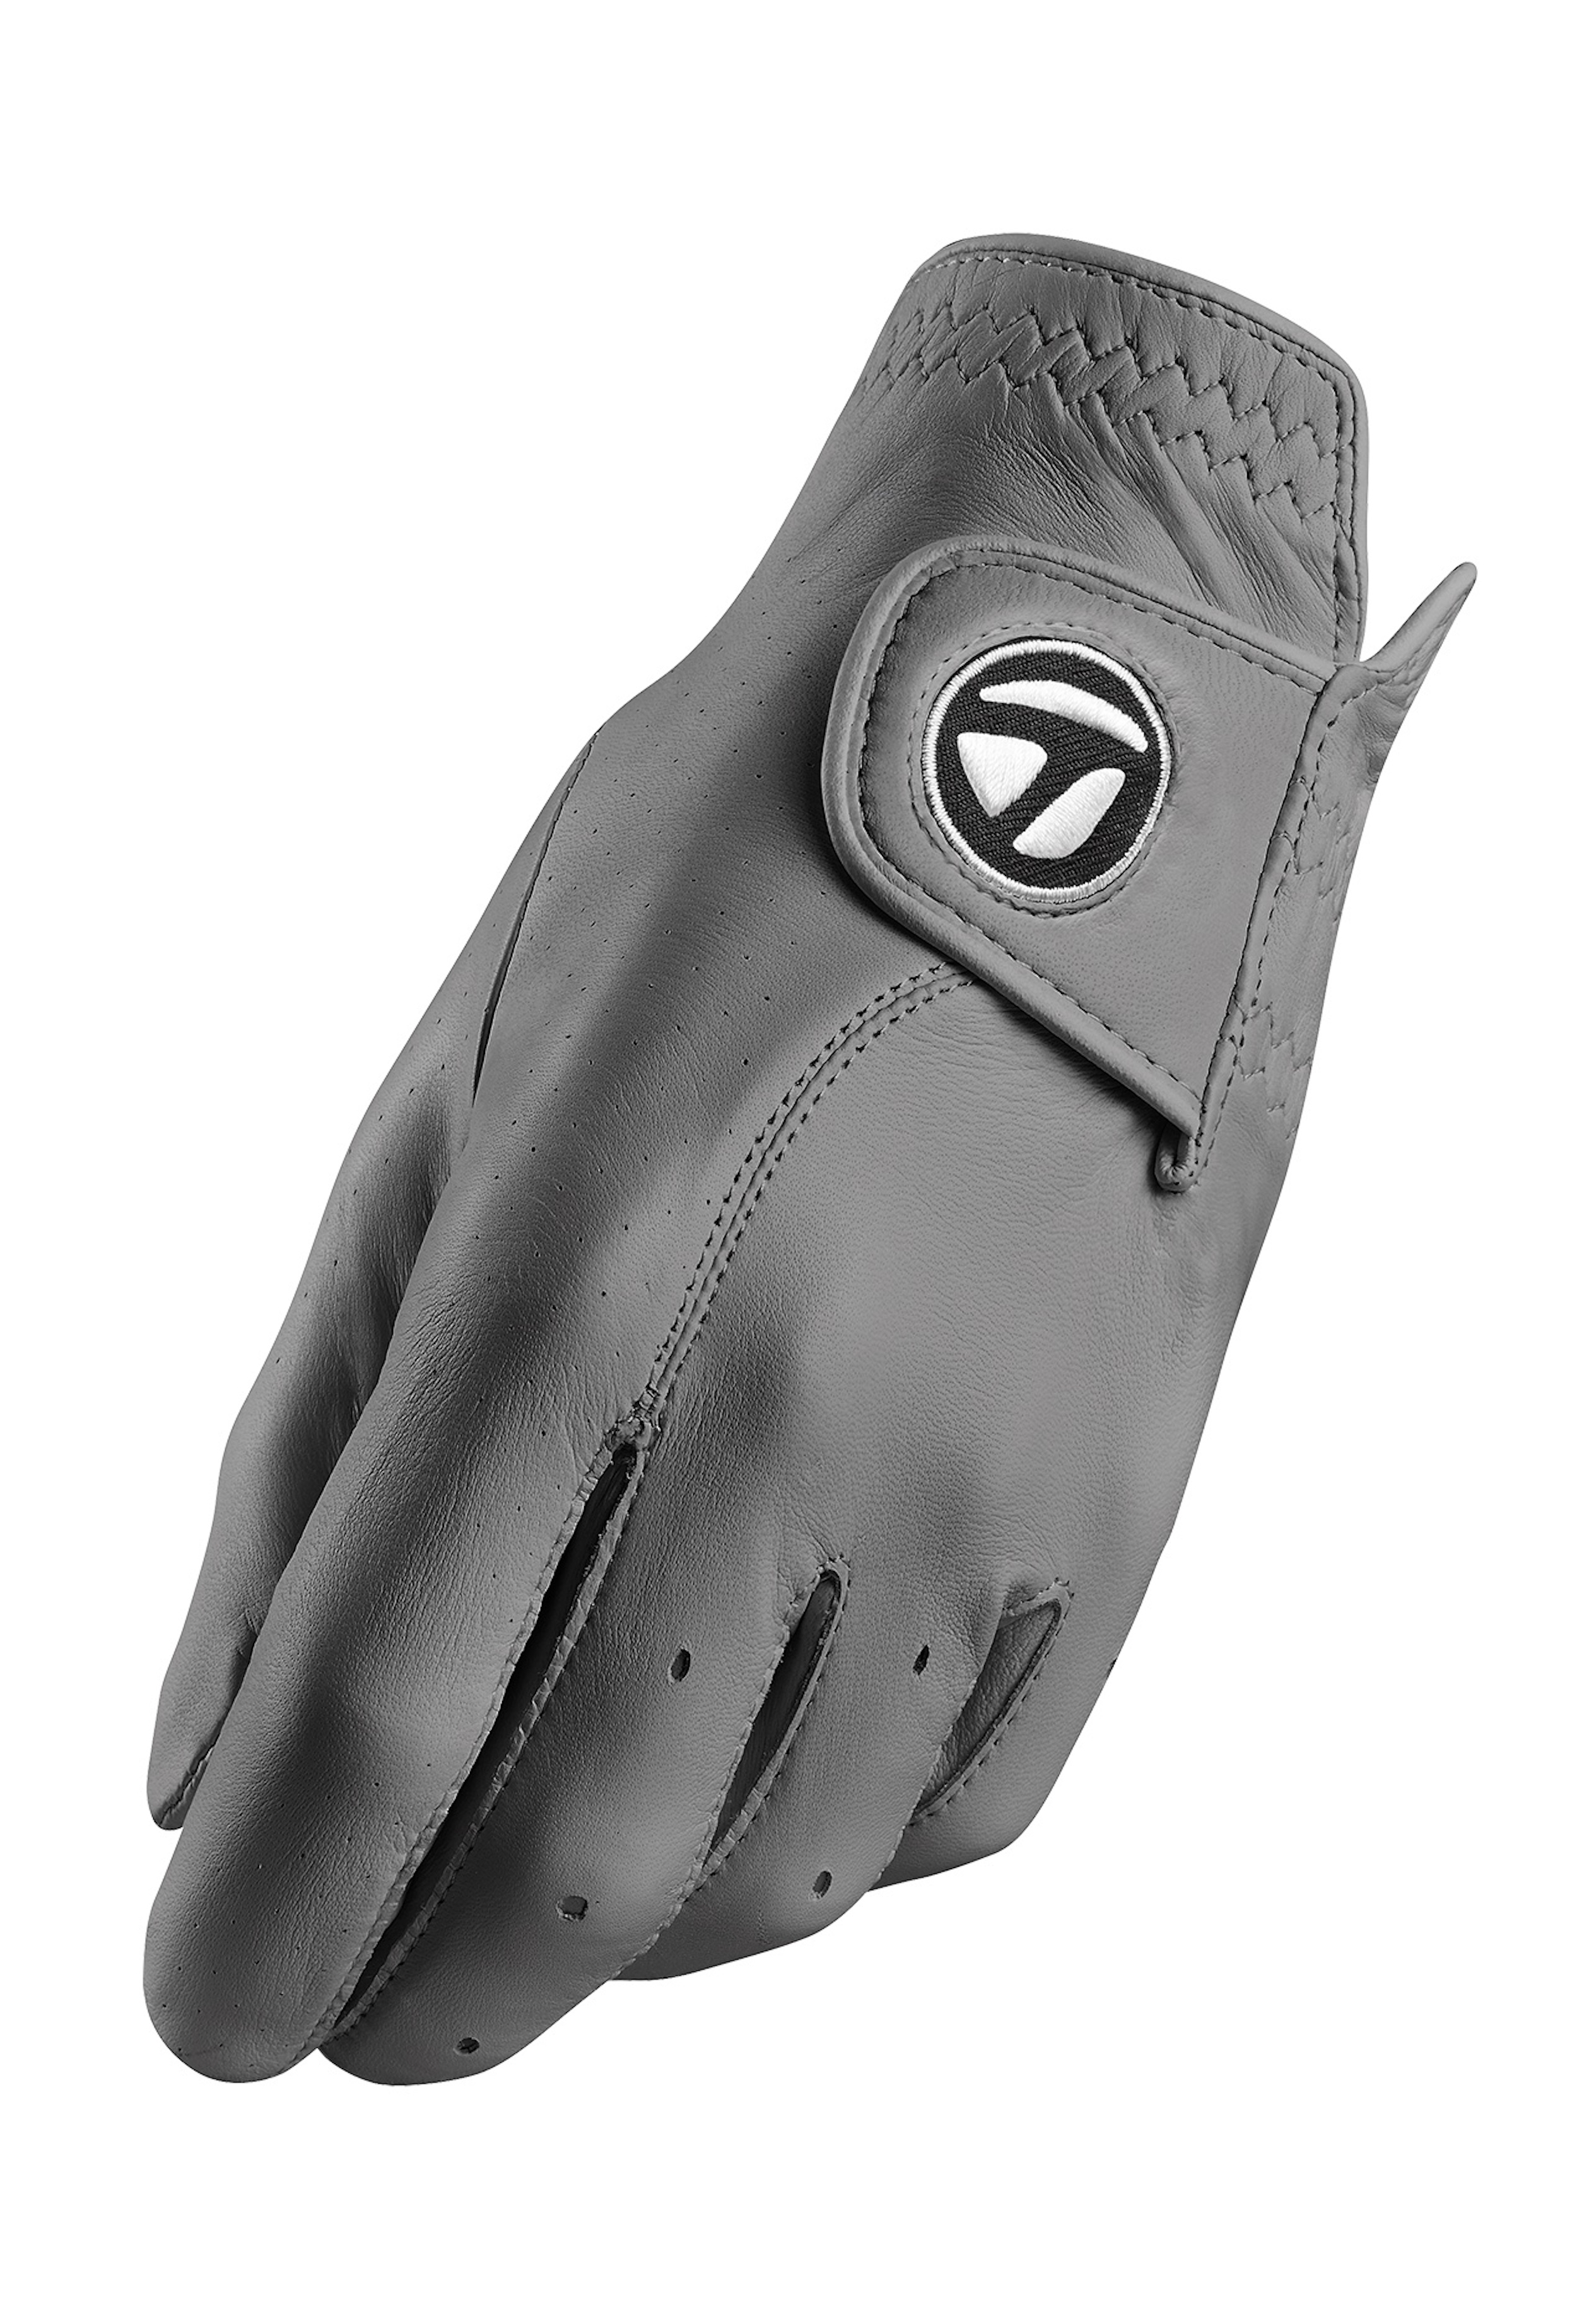 TaylorMade Tour Preferred Golf Gloves Men at